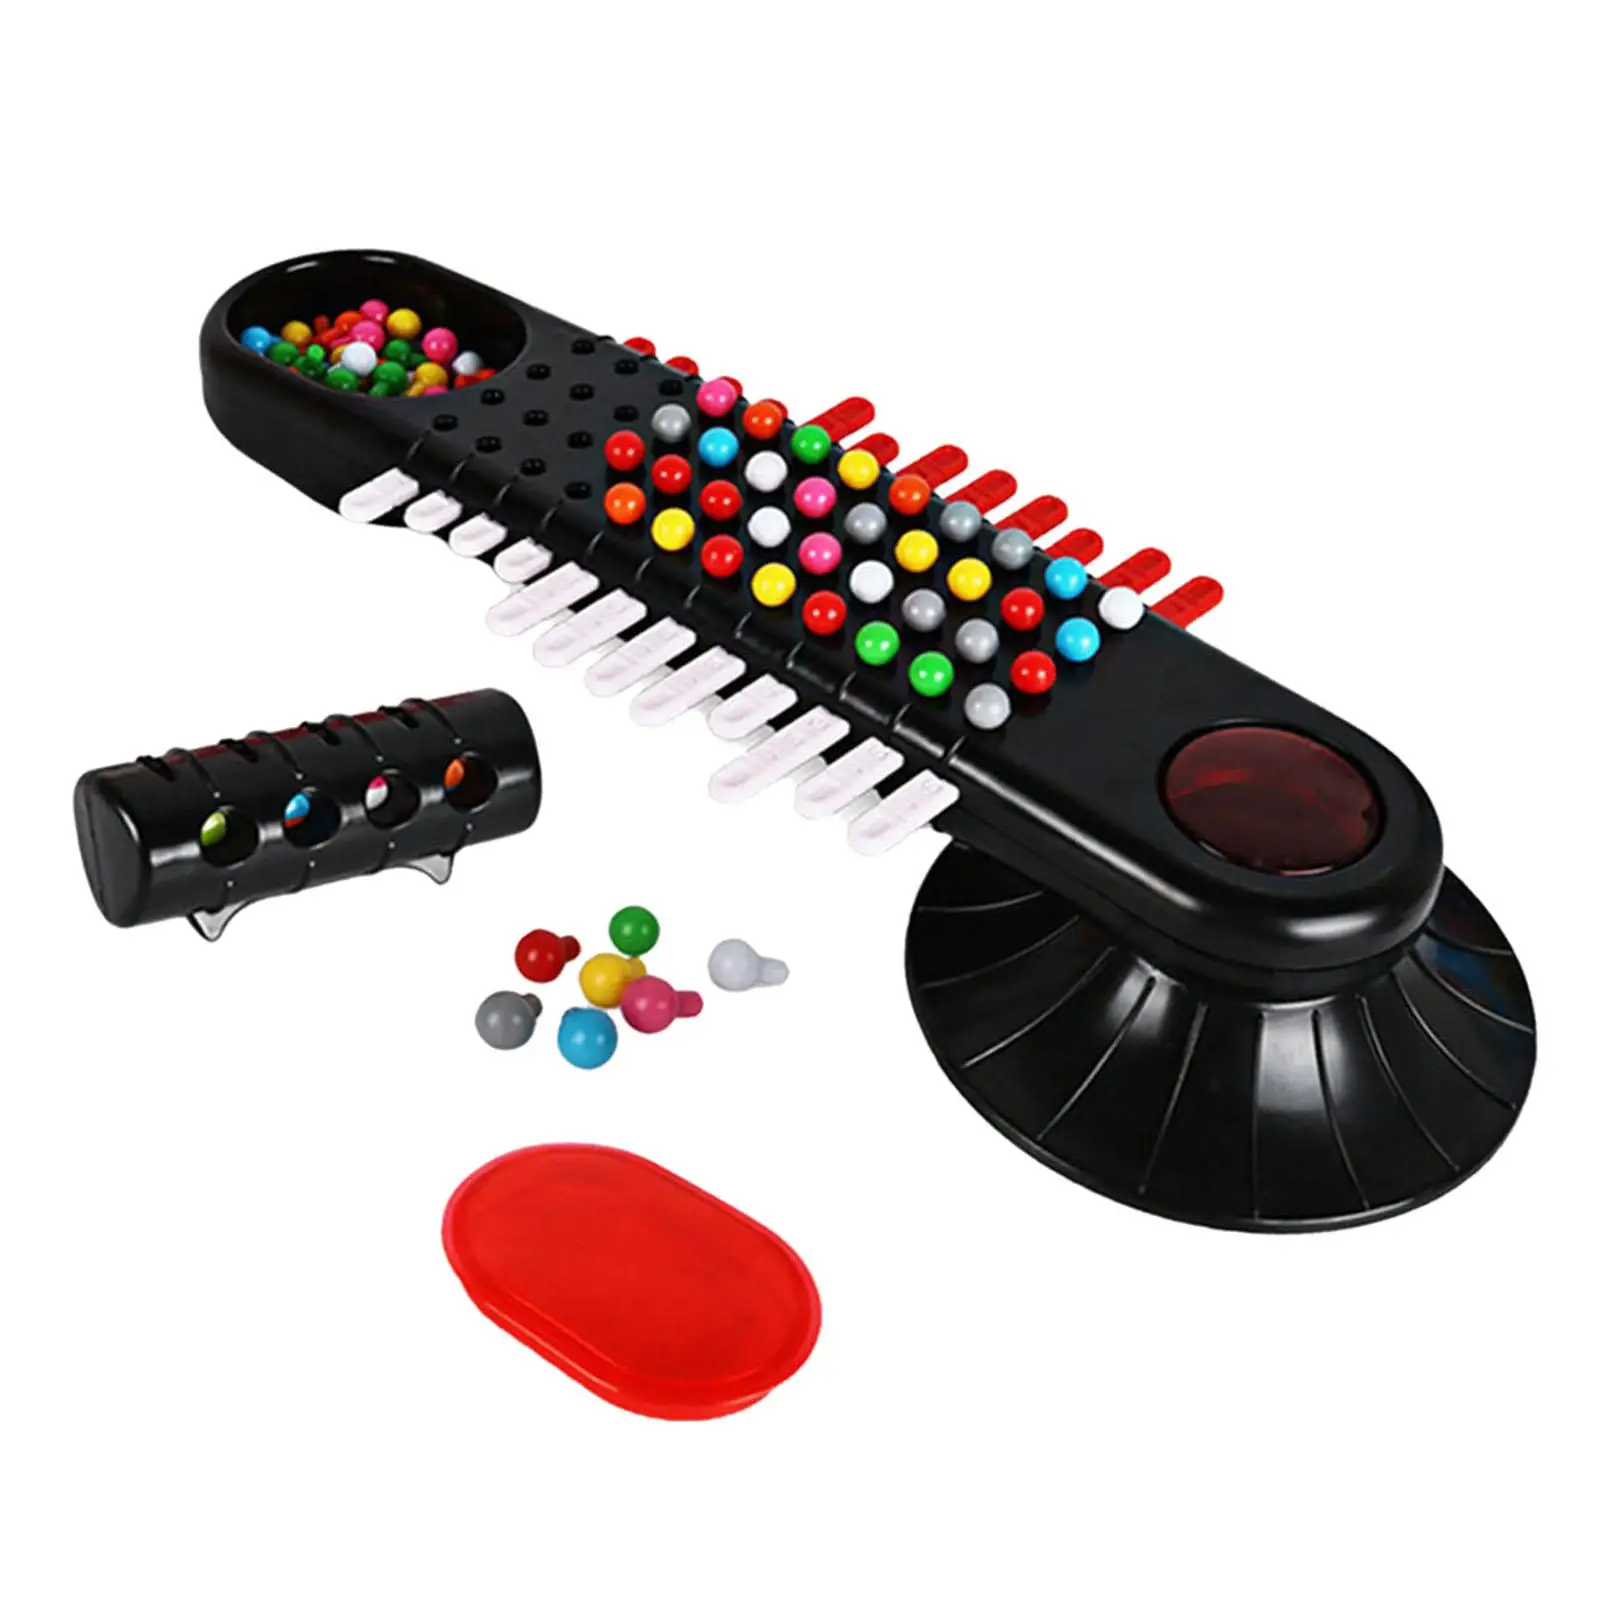 Code Cracking Bead Game Codebreaker Game Educational Development Toys solution Password Toy for Age 8 and up Children School